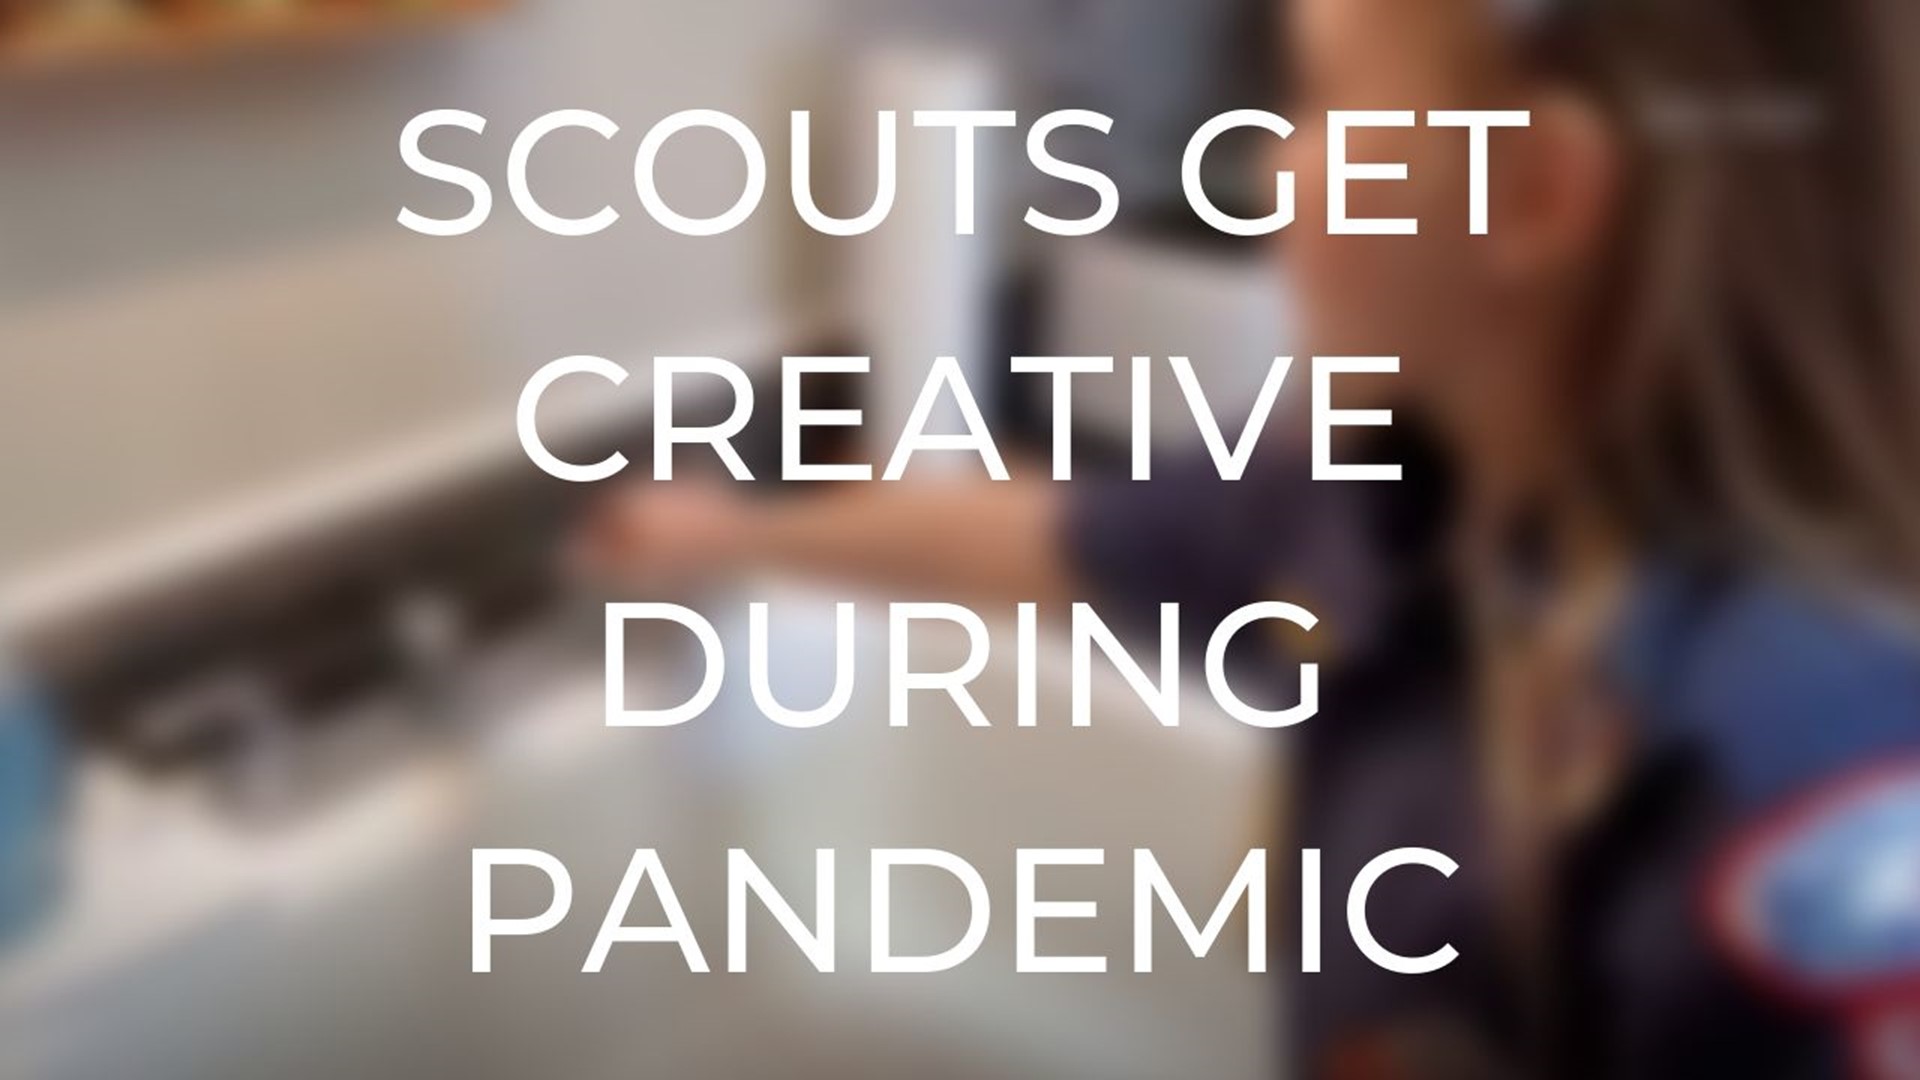 The Boy Scouts are getting creative during the coronavirus pandemic. Jon Goodwin shows us how.